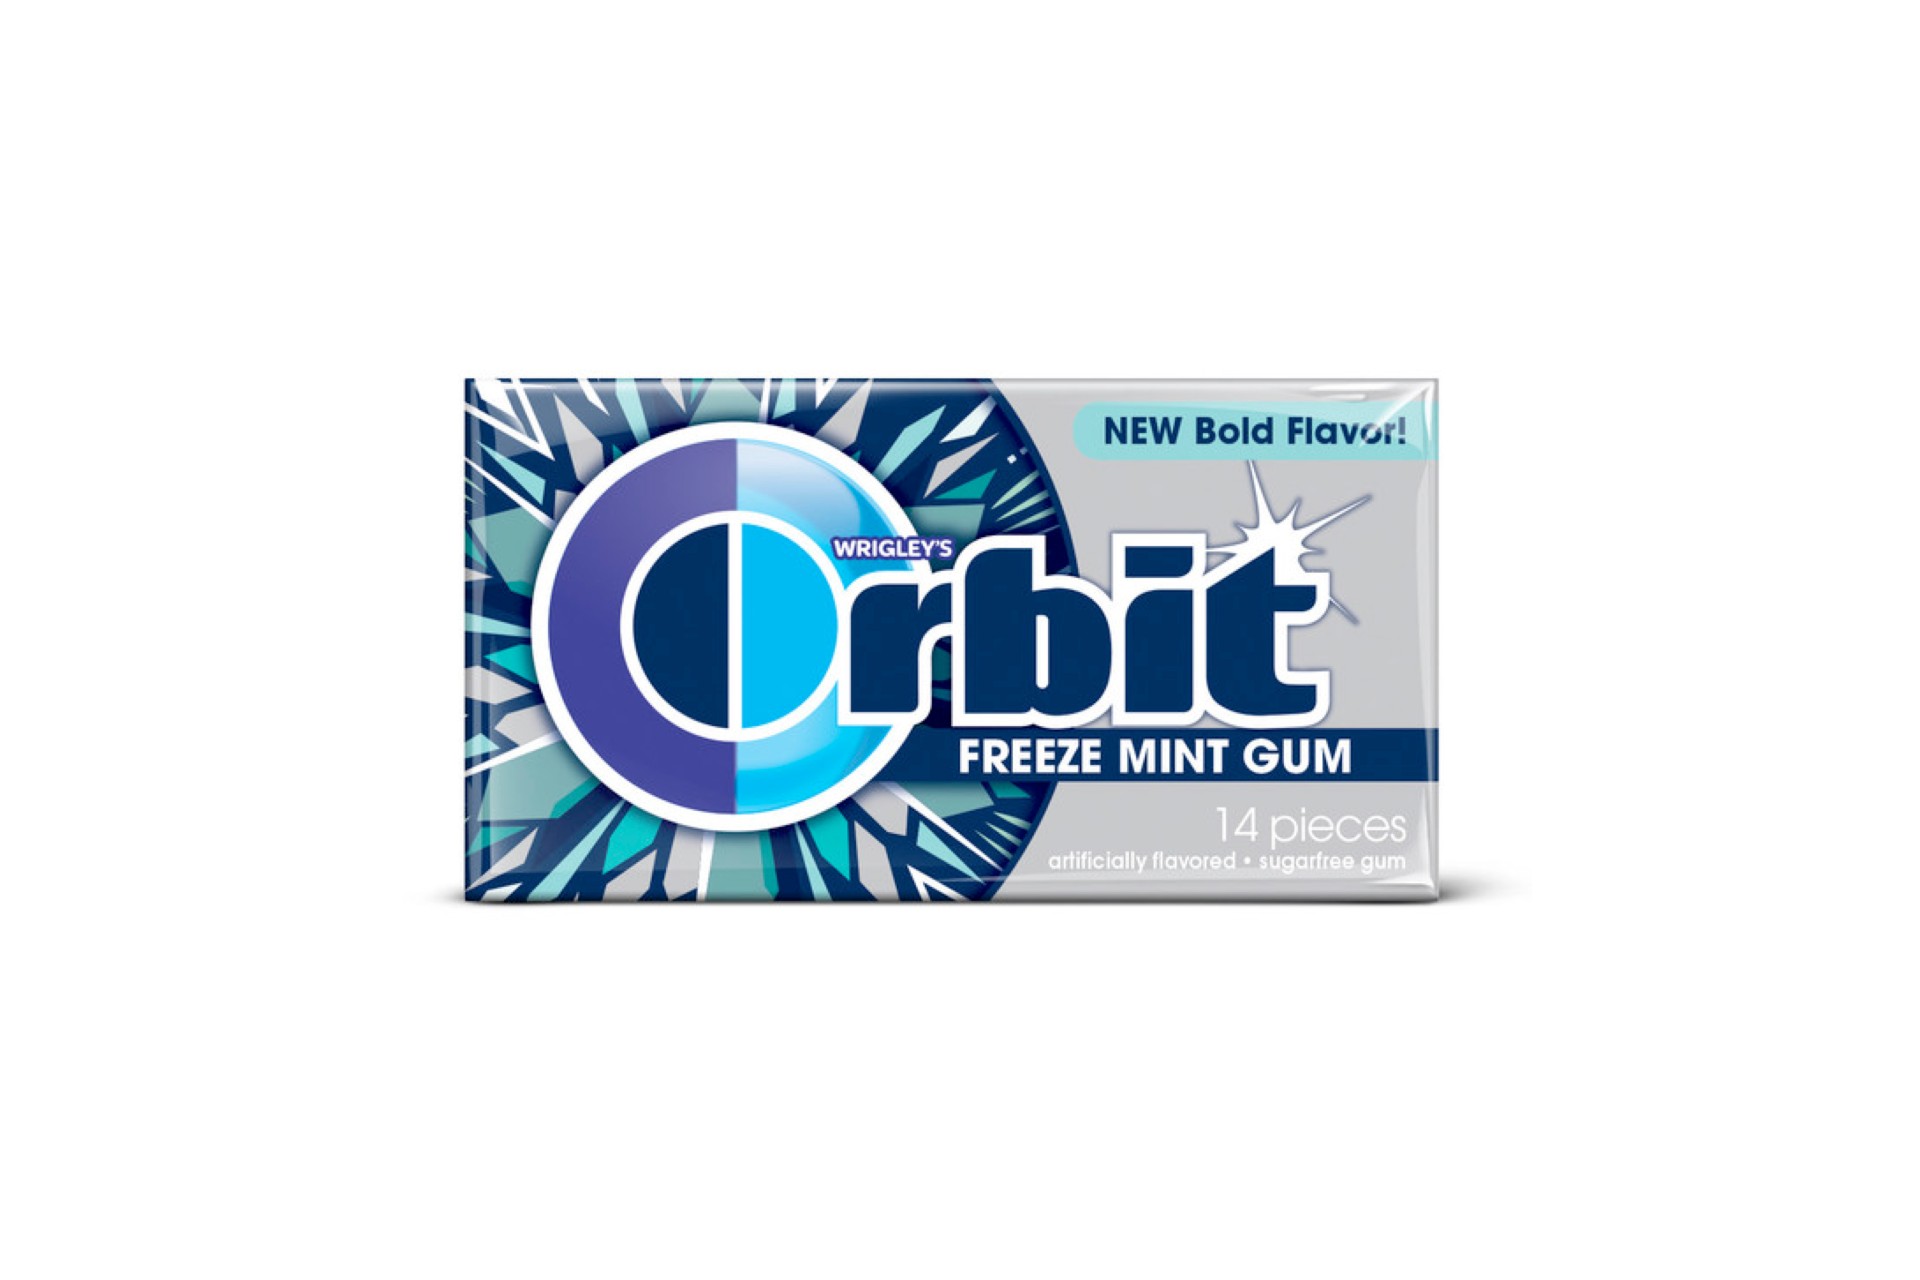 A Minty Chewing Gum Is Named for a Snowboarder - The New York Times